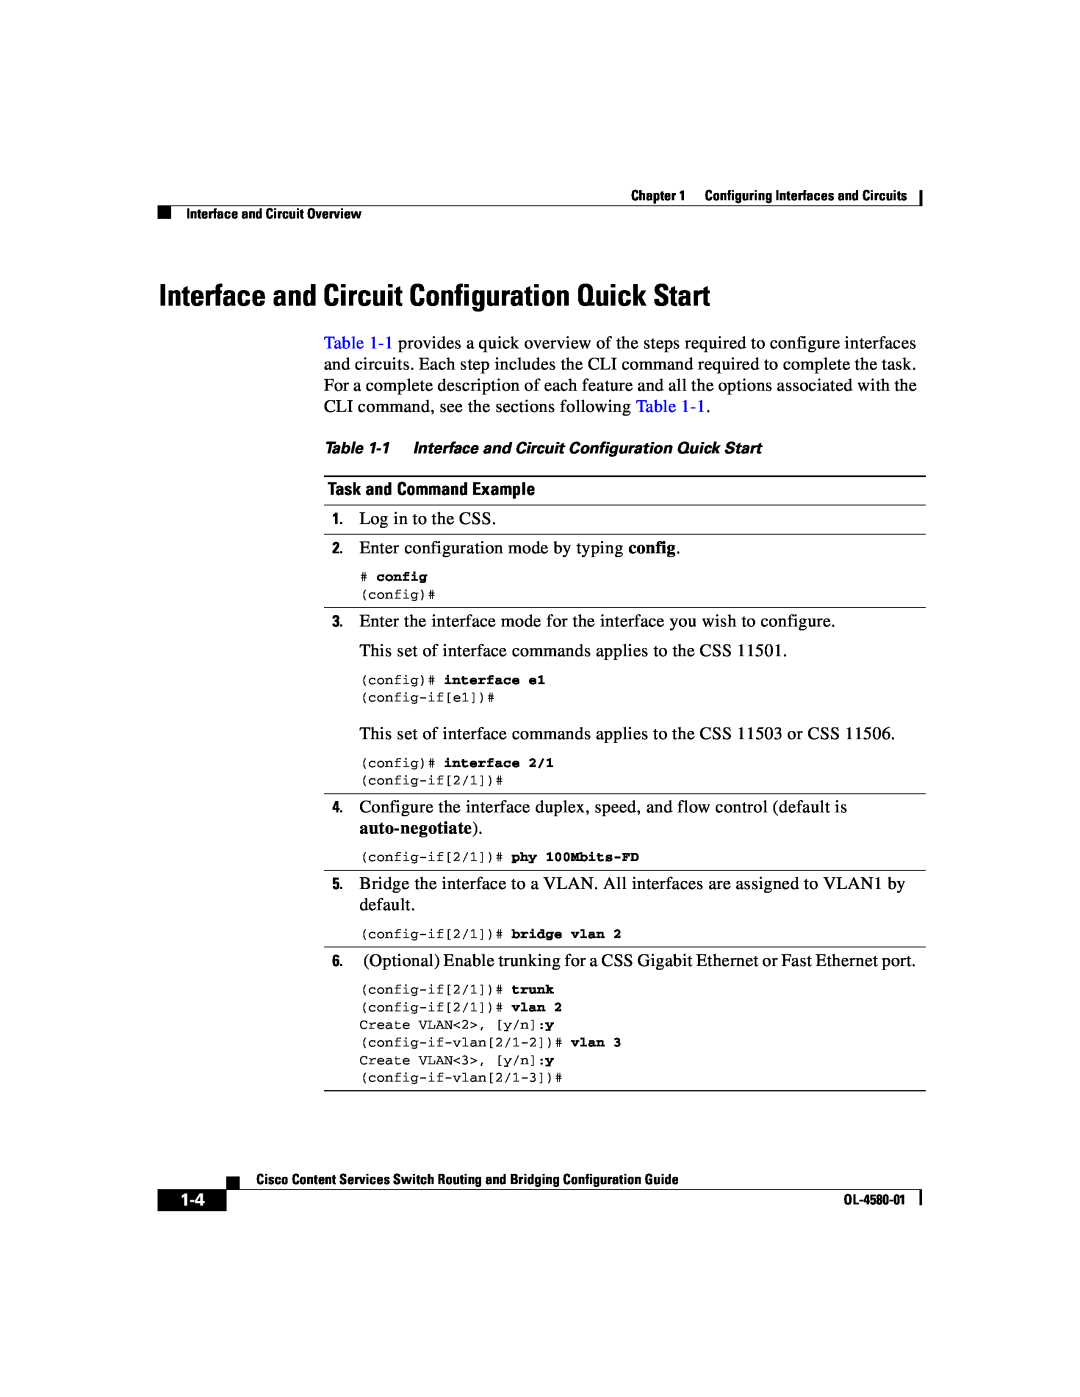 Cisco Systems OL-4580-01 manual Interface and Circuit Configuration Quick Start, Task and Command Example 